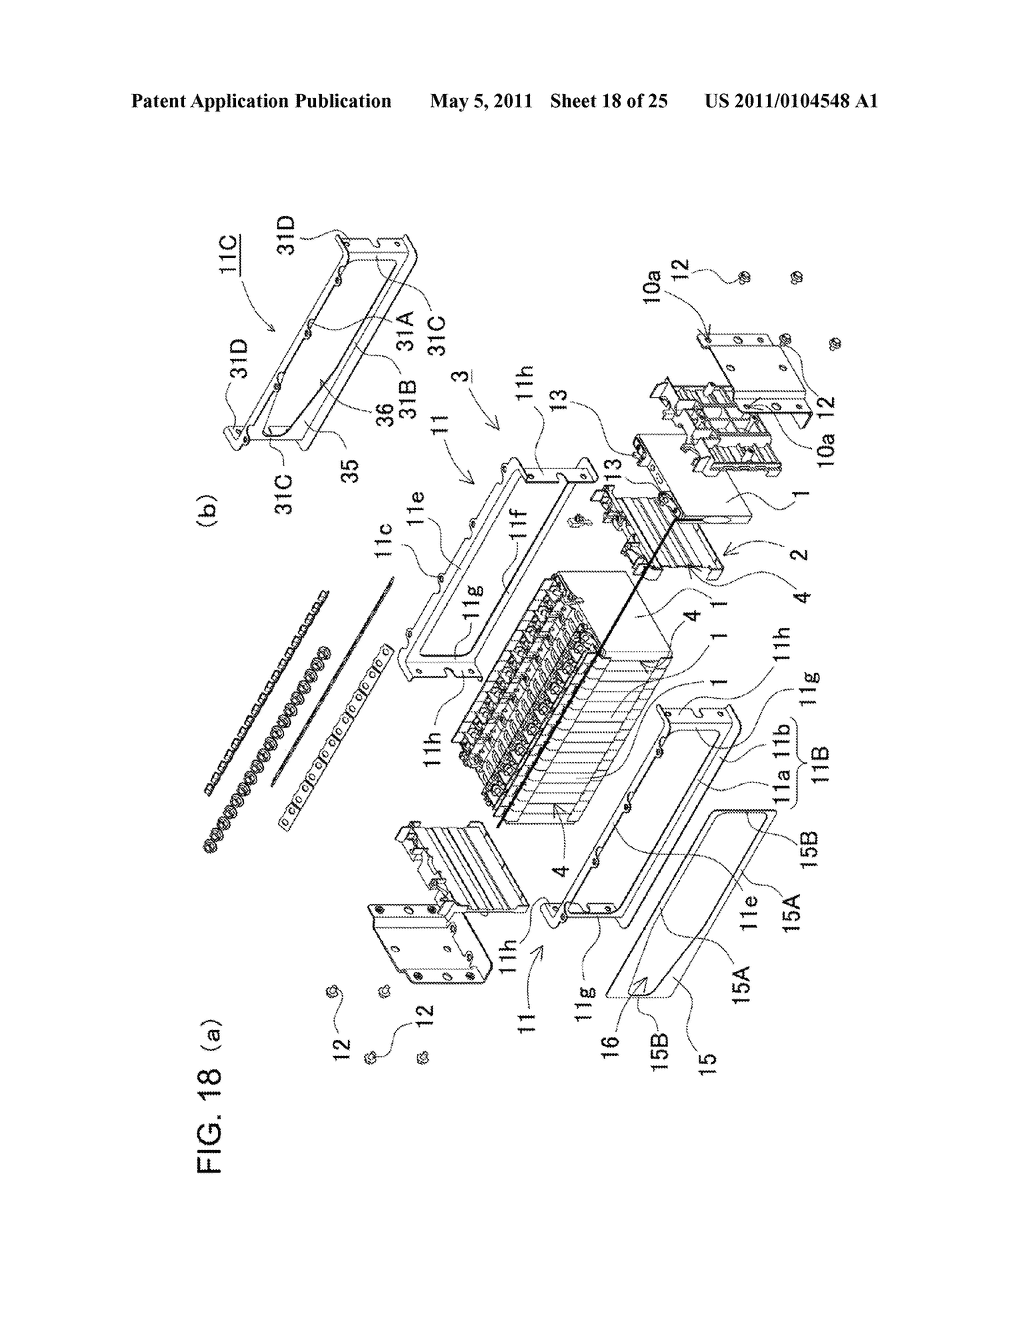 POWER SUPPLY DEVICE INCLUDING A PLURALITY OF BATTERY CELLS ARRANGED SIDE BY SIDE - diagram, schematic, and image 19